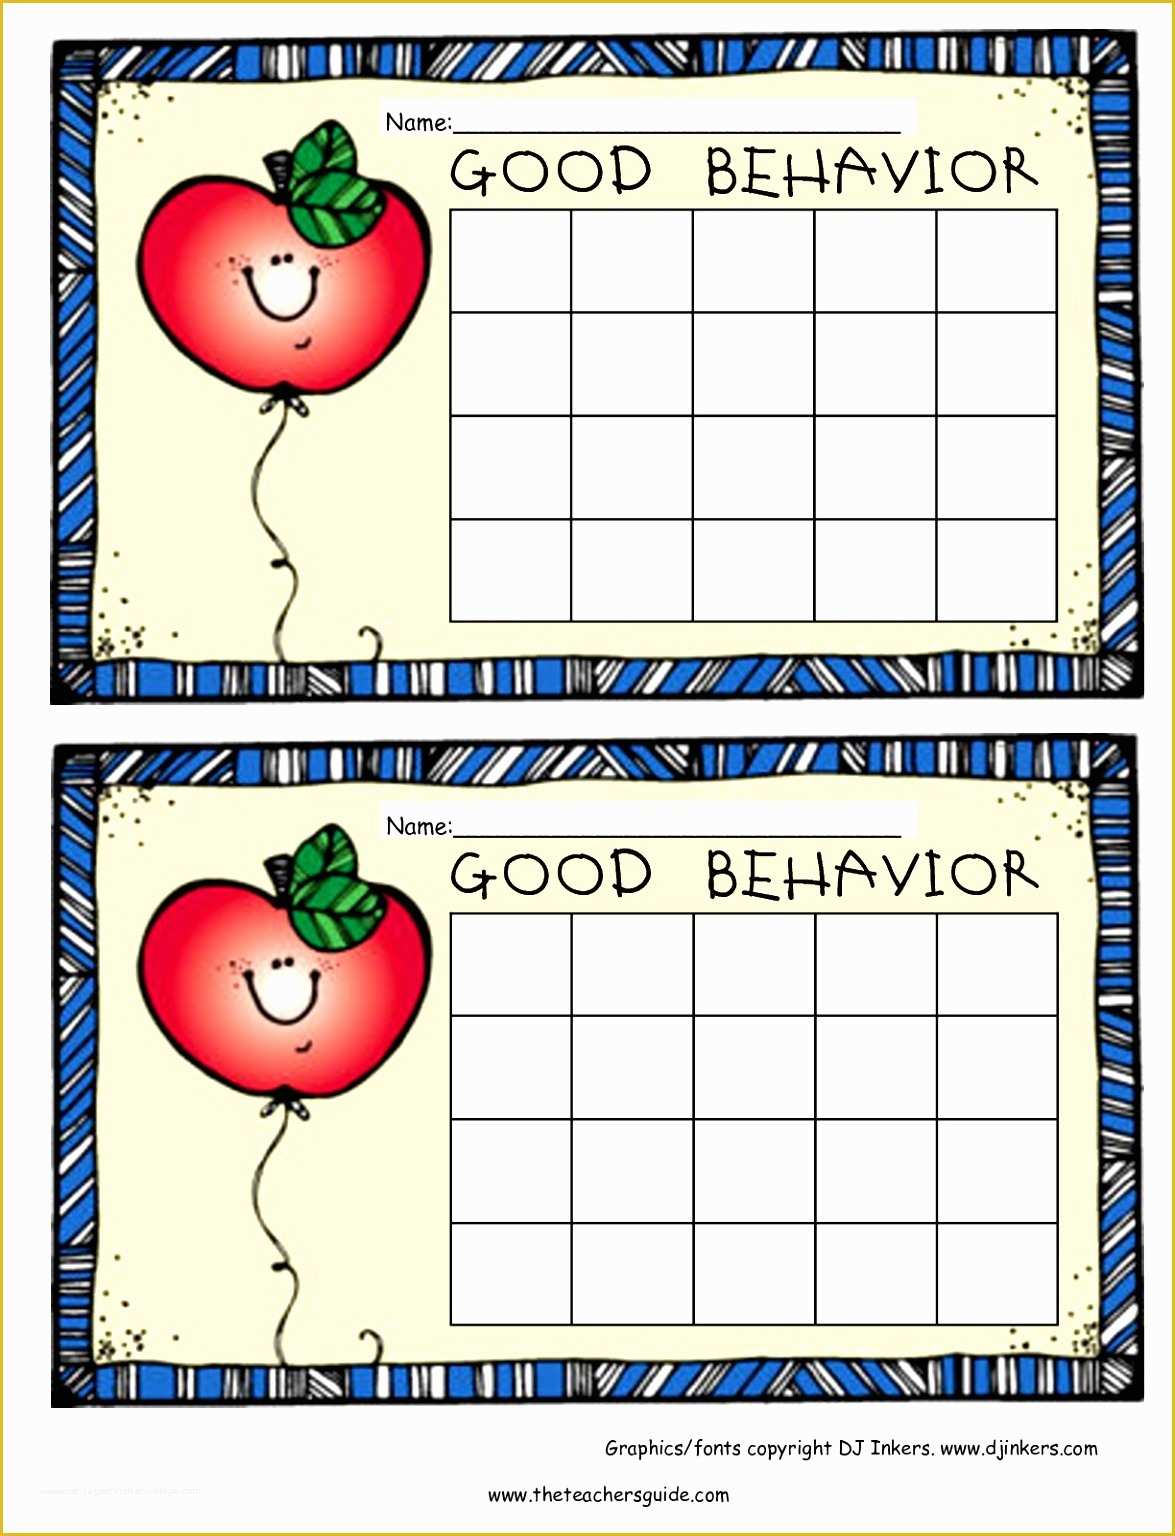 Free Sticker Templates Of Free Printable Stickers and Behavior Charts From Stickers